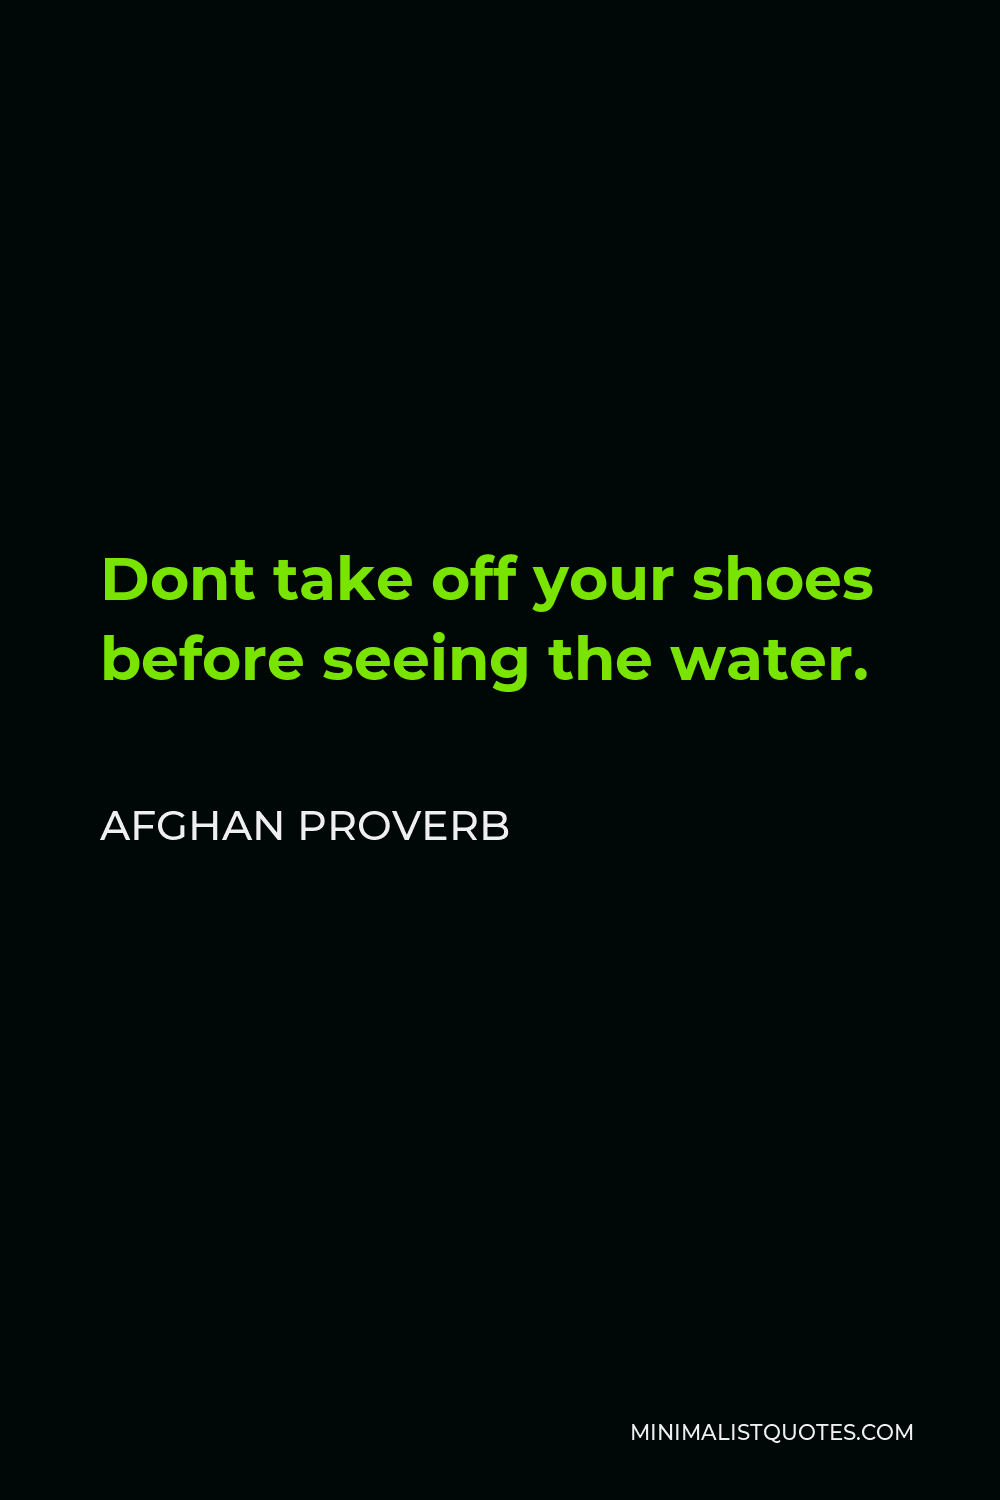 Afghan Proverb Quote - Don’t take off your shoes before seeing the water.